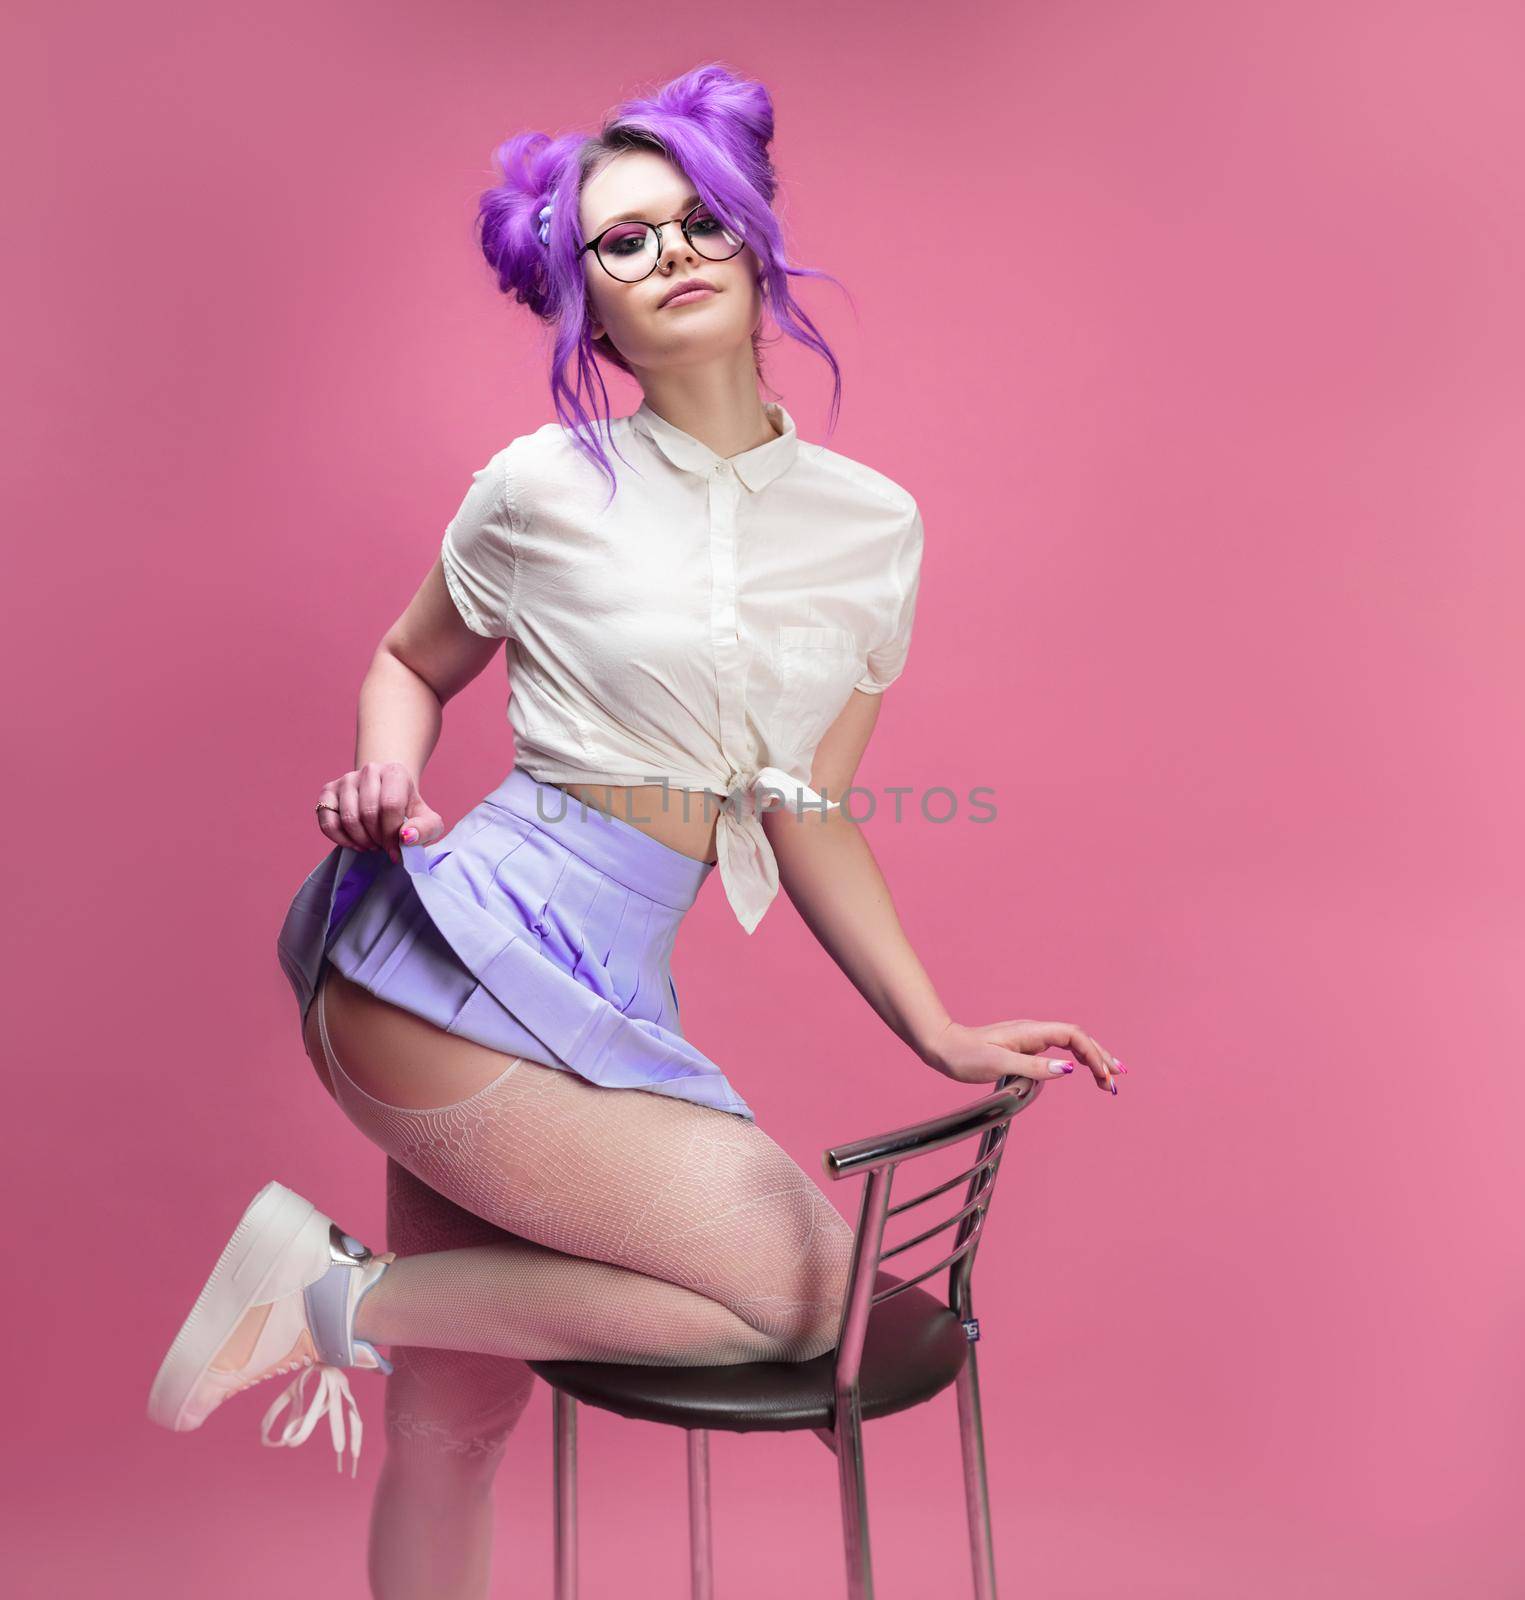 the sexy schoolgirl girl with purple hair in summer short clothes and beautiful underwear on a pink background